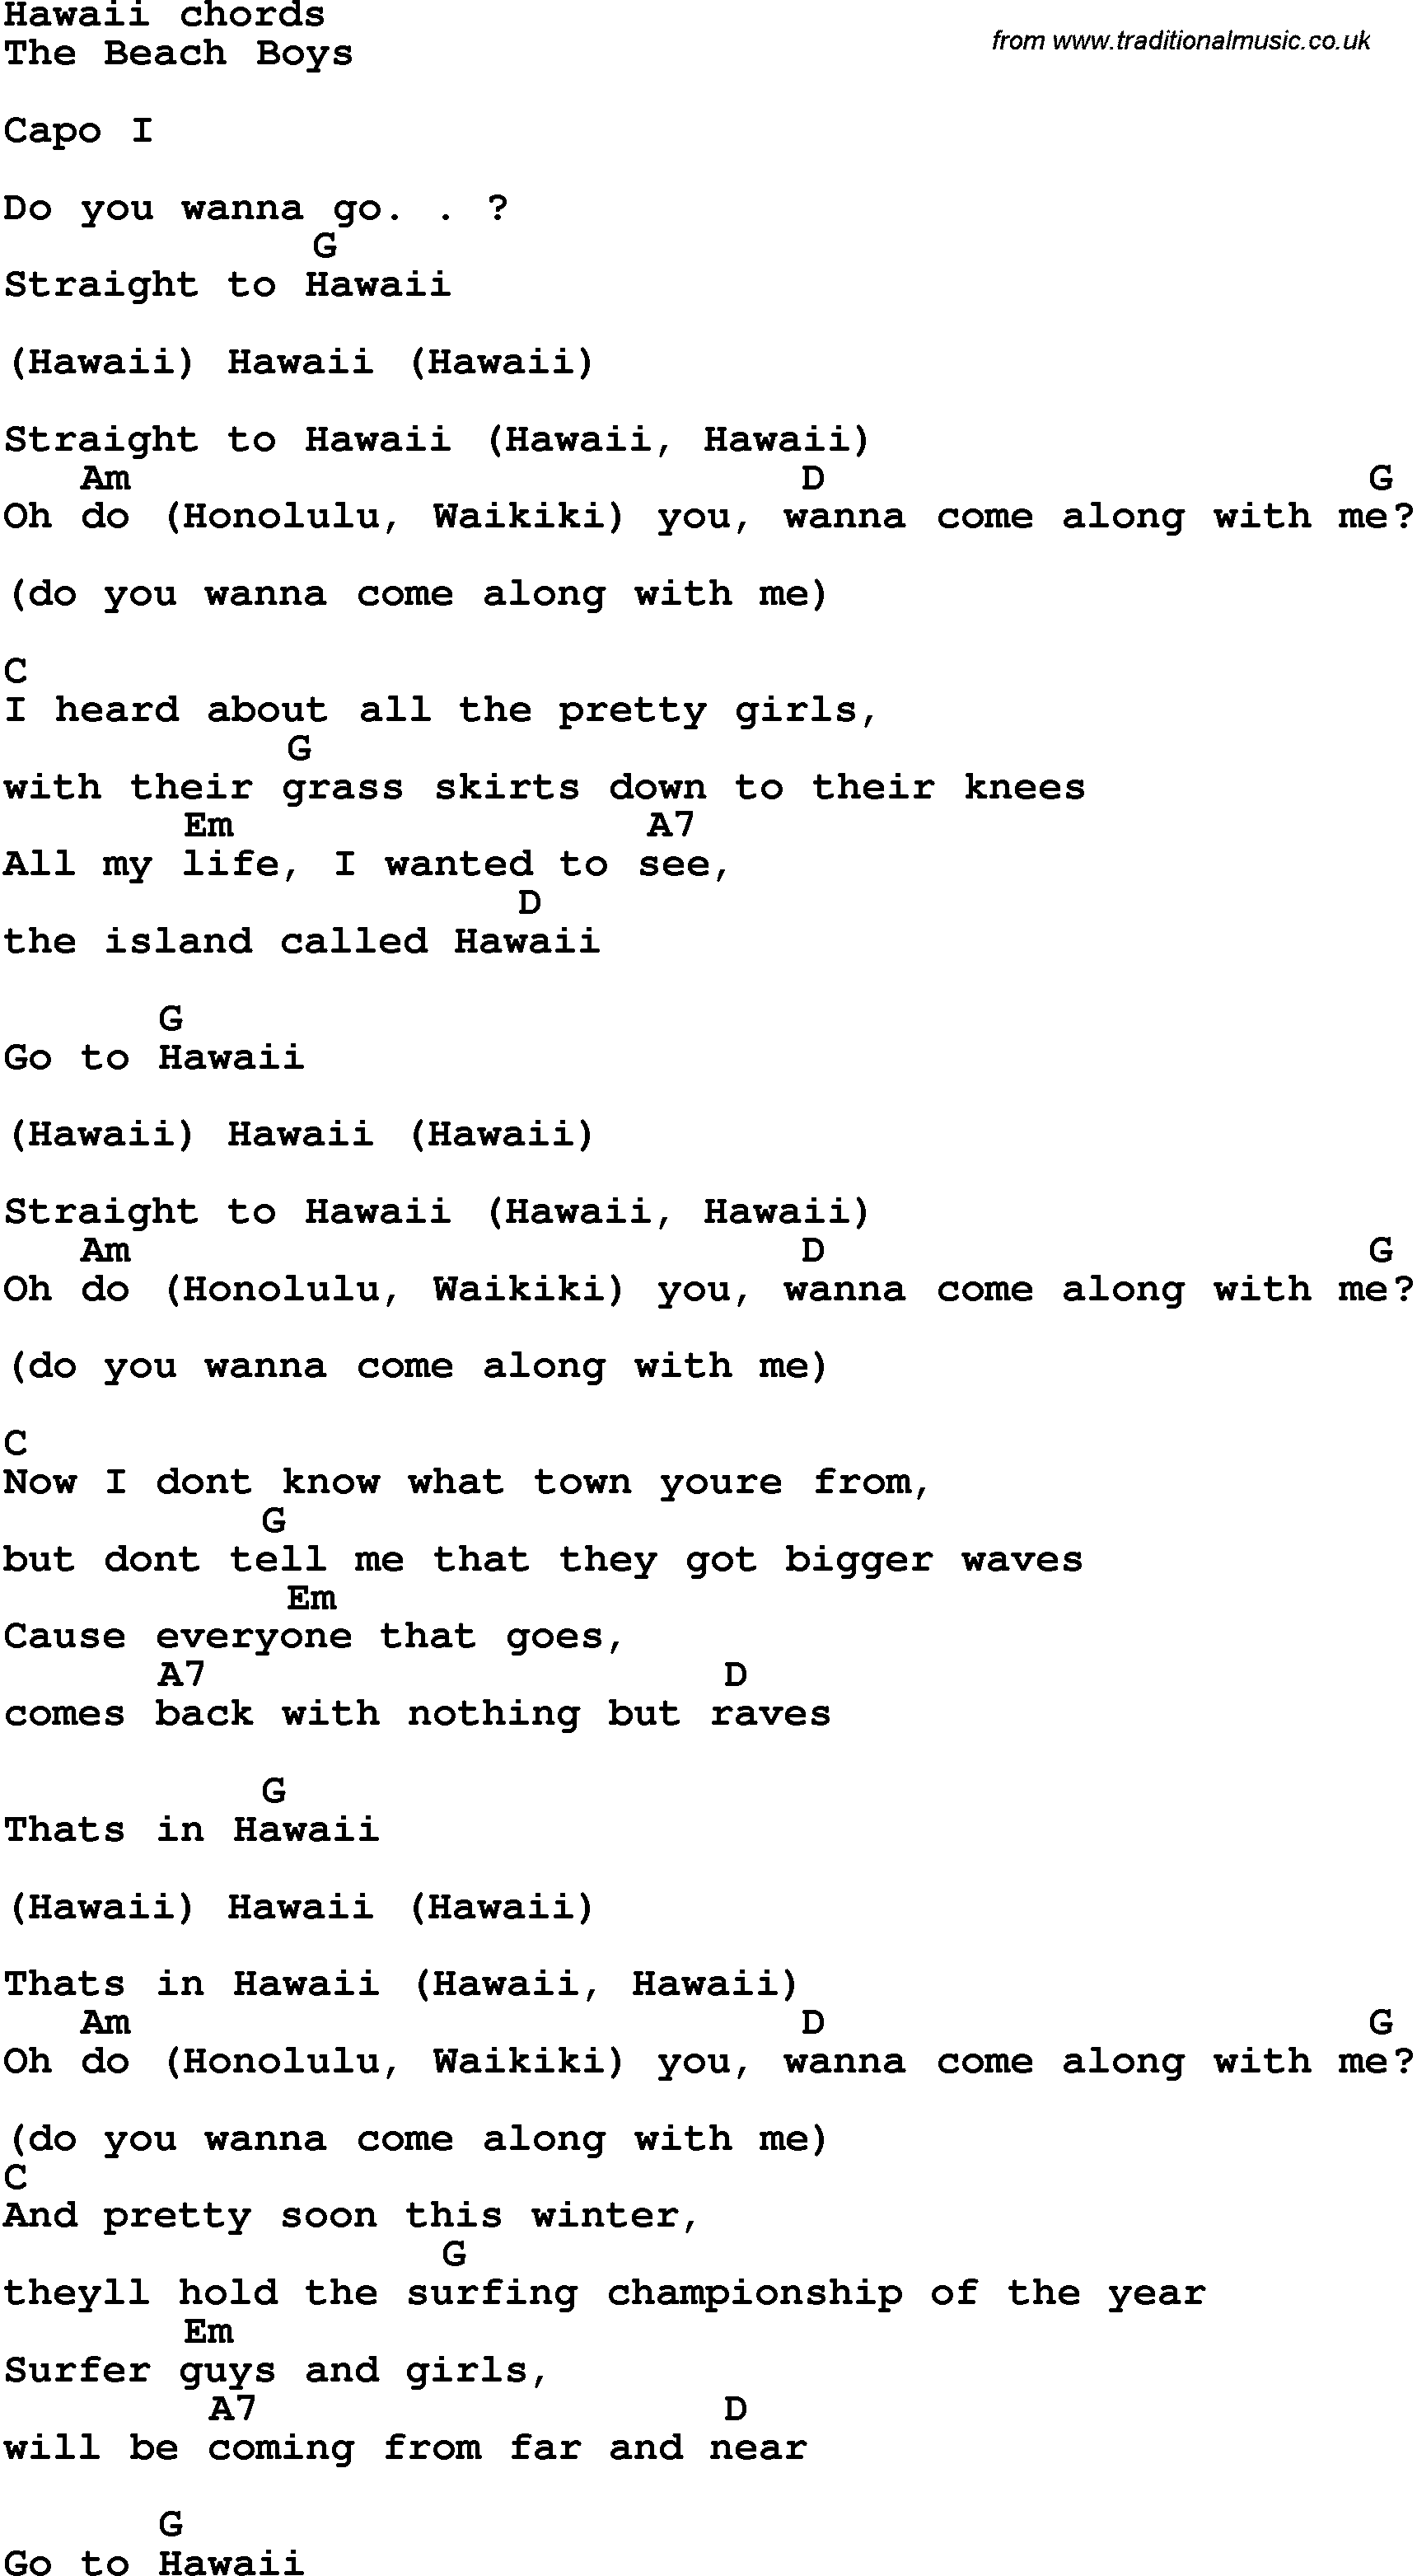 Song Lyrics with guitar chords for Hawaii